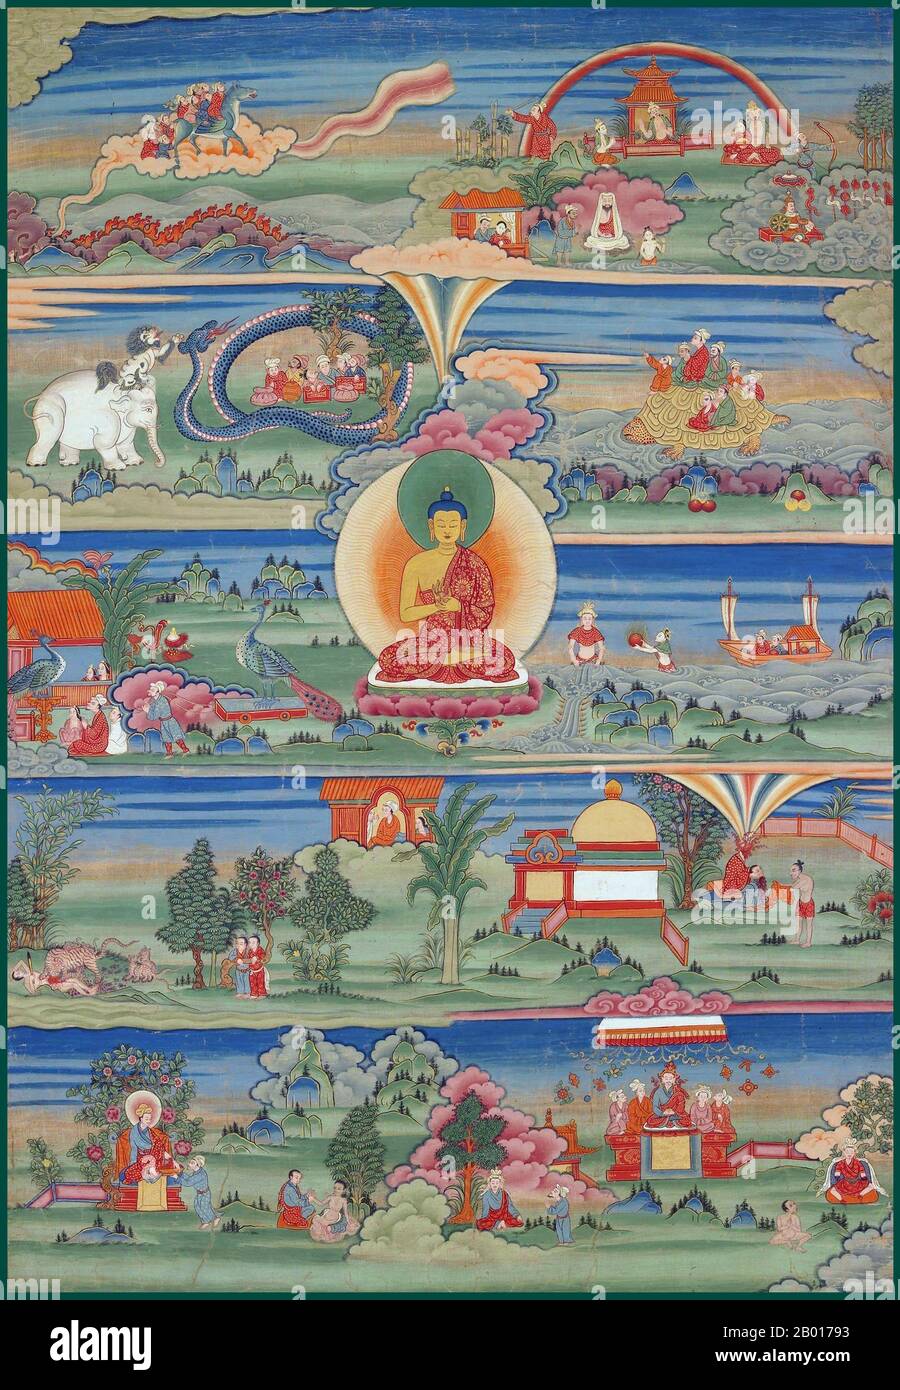 Bhutan: Painted jataka Thangka. Phajoding Gonpa, Thimphu, 18th-19th Century.  Scenes from the traditional jataka, or Buddha life-cycle stories. The Jatakas are amongst the earliest Buddhist literature, with metrical analysis methods dating their composure to around the 4th century BCE.  A thangka, also romanised as 'tangka', 'thanka' or 'tanka', is a Tibetan silk painting generally depicting a Buddhist deity or mandala. Stock Photo